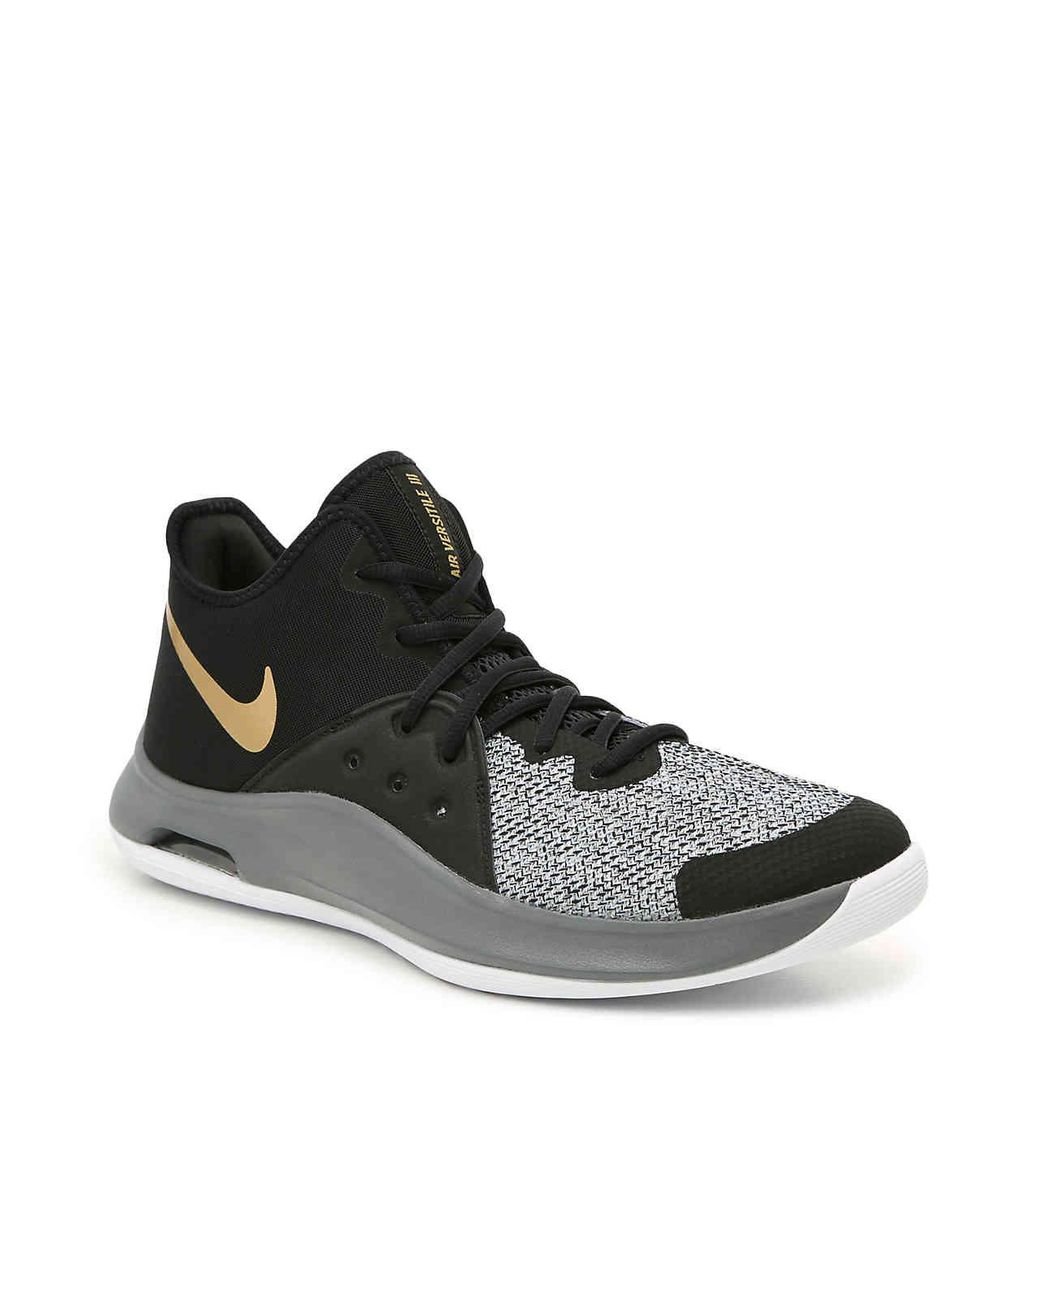 Nike Synthetic Air Versatile Iii Basketball Shoe in Grey/Gold/Black (Black)  for Men | Lyst